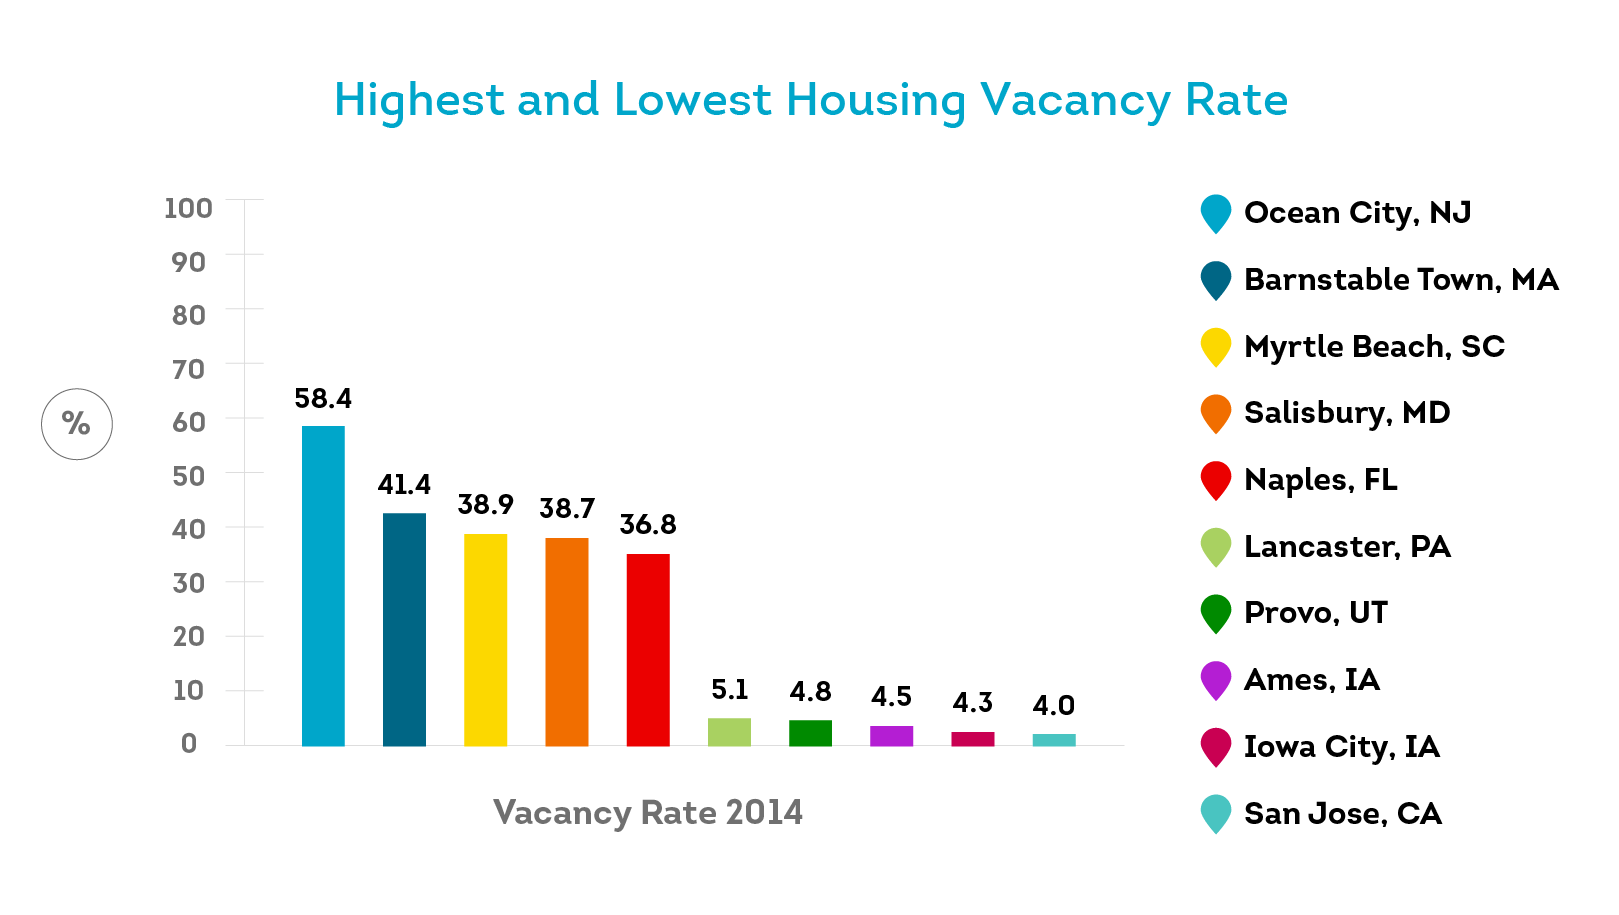 The national vacancy rate is 7.3%, but local vacancy rates can vary dramatically